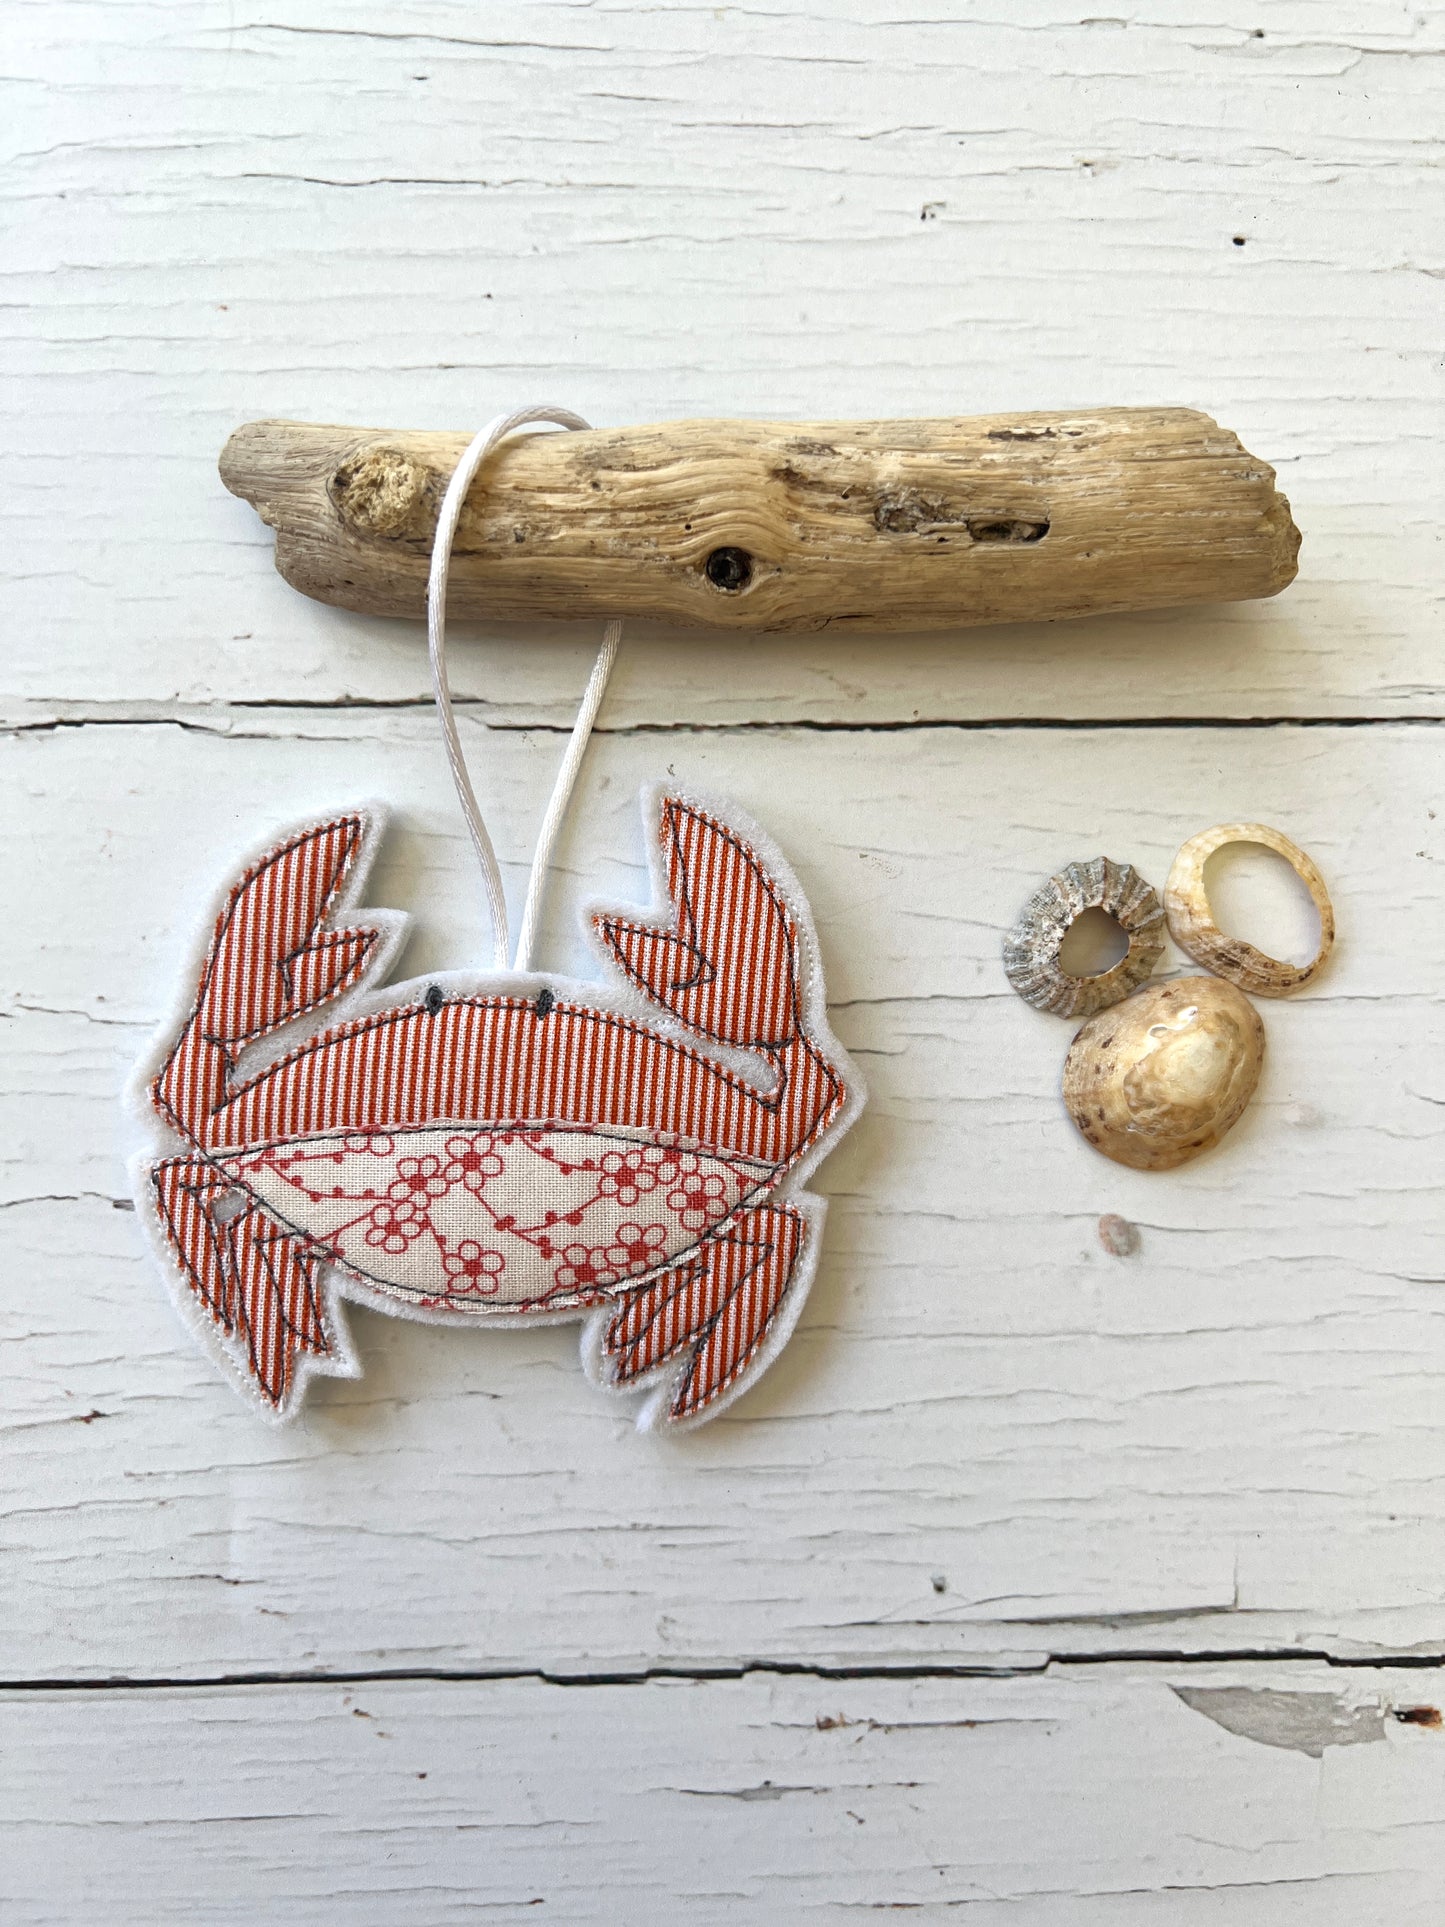 Fabric Embroidered Decorations: Seagulls, Seal, Buoy, Crab, Ice-Cream